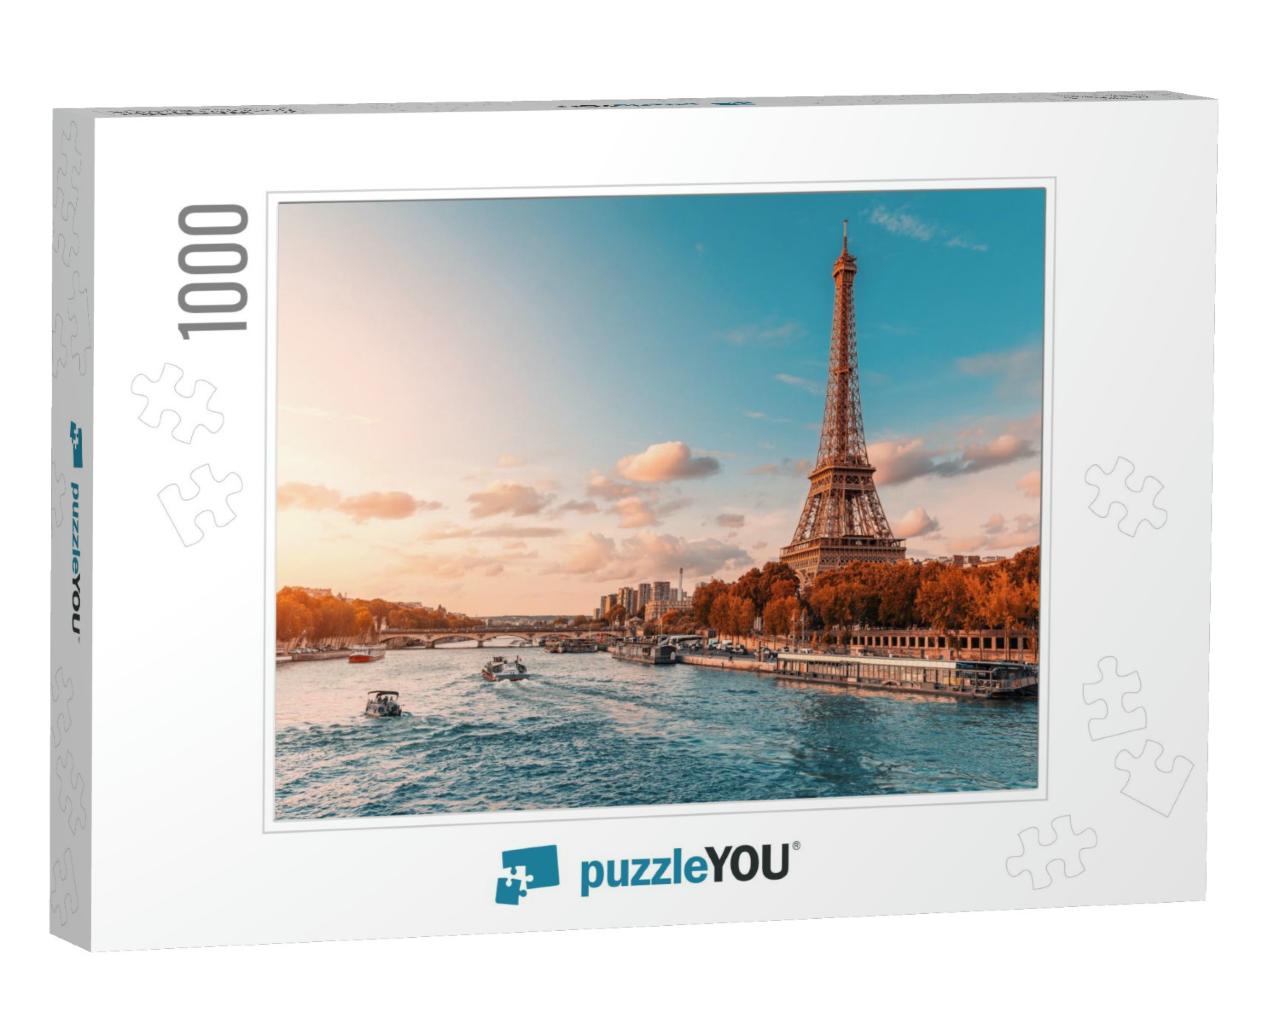 The Main Attraction of Paris & All of Europe is the Eiffe... Jigsaw Puzzle with 1000 pieces